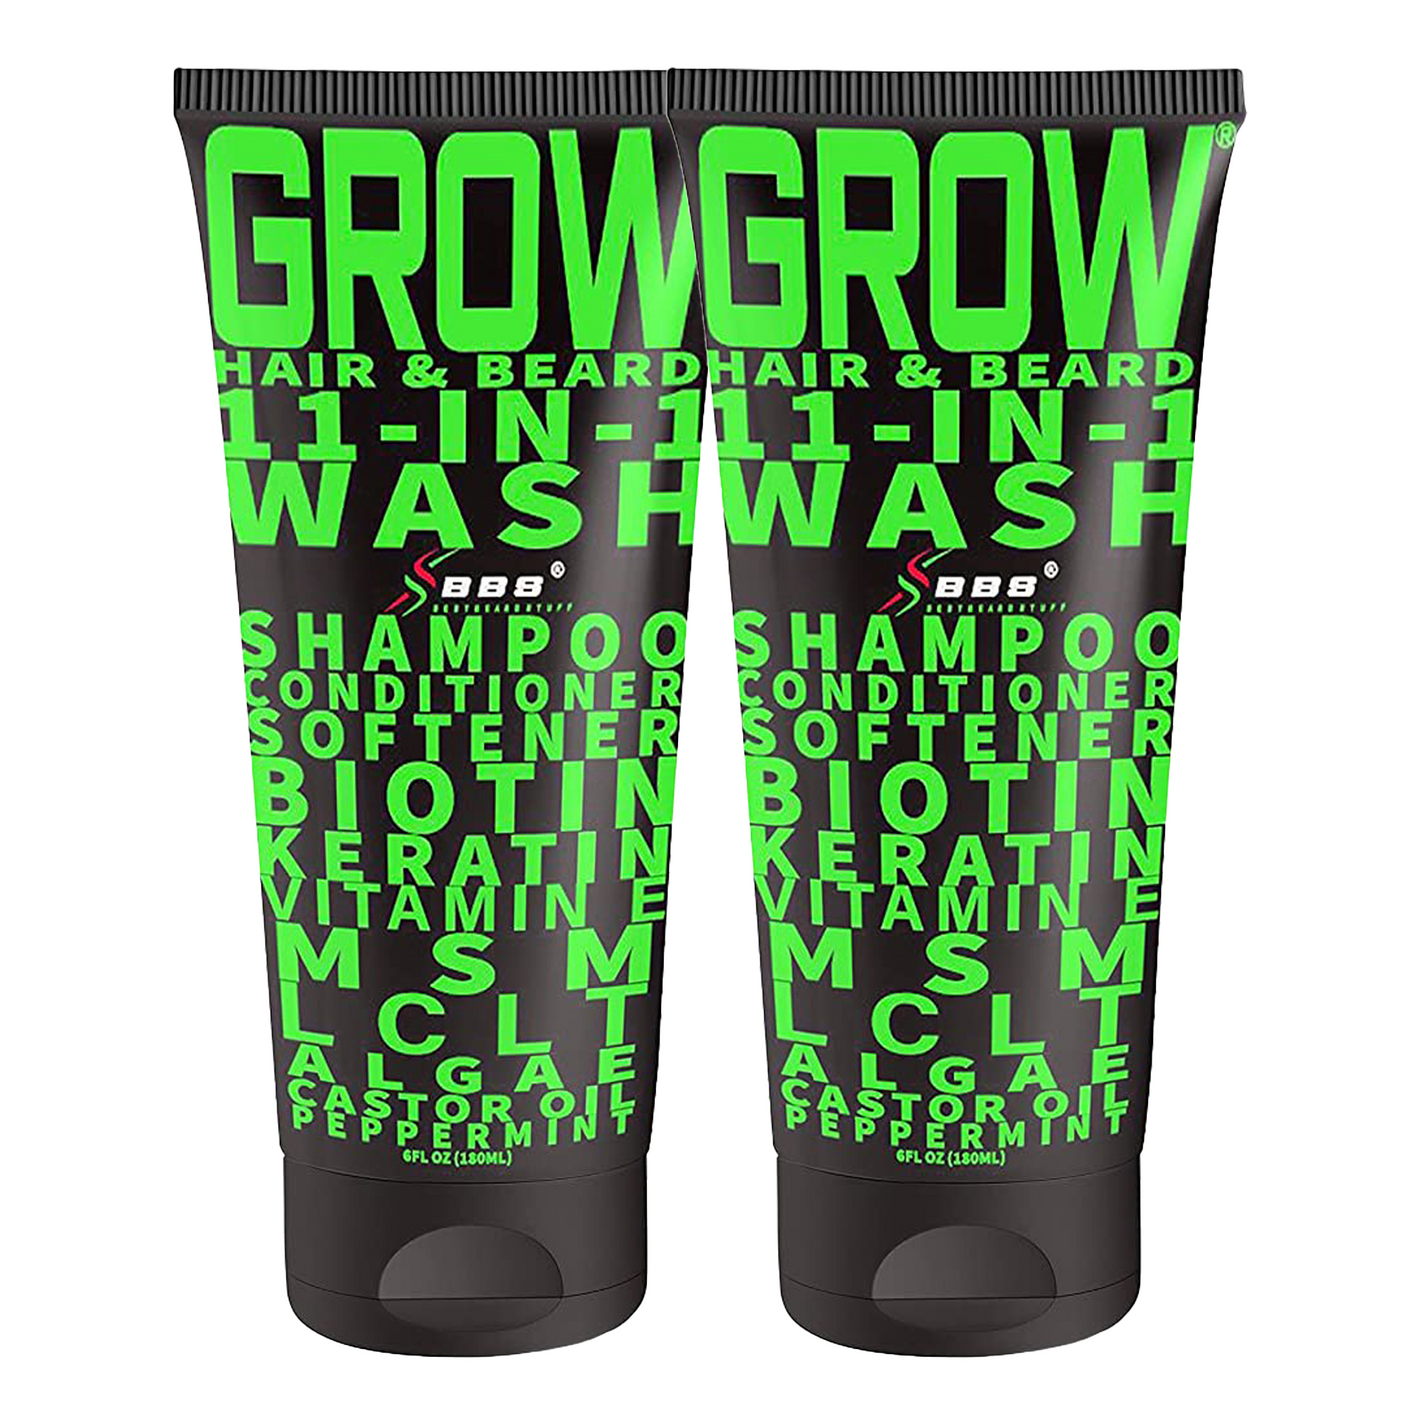 GROW MORE!!! Double Pack of GROW® Hair & Beard 11-in-1 Wash